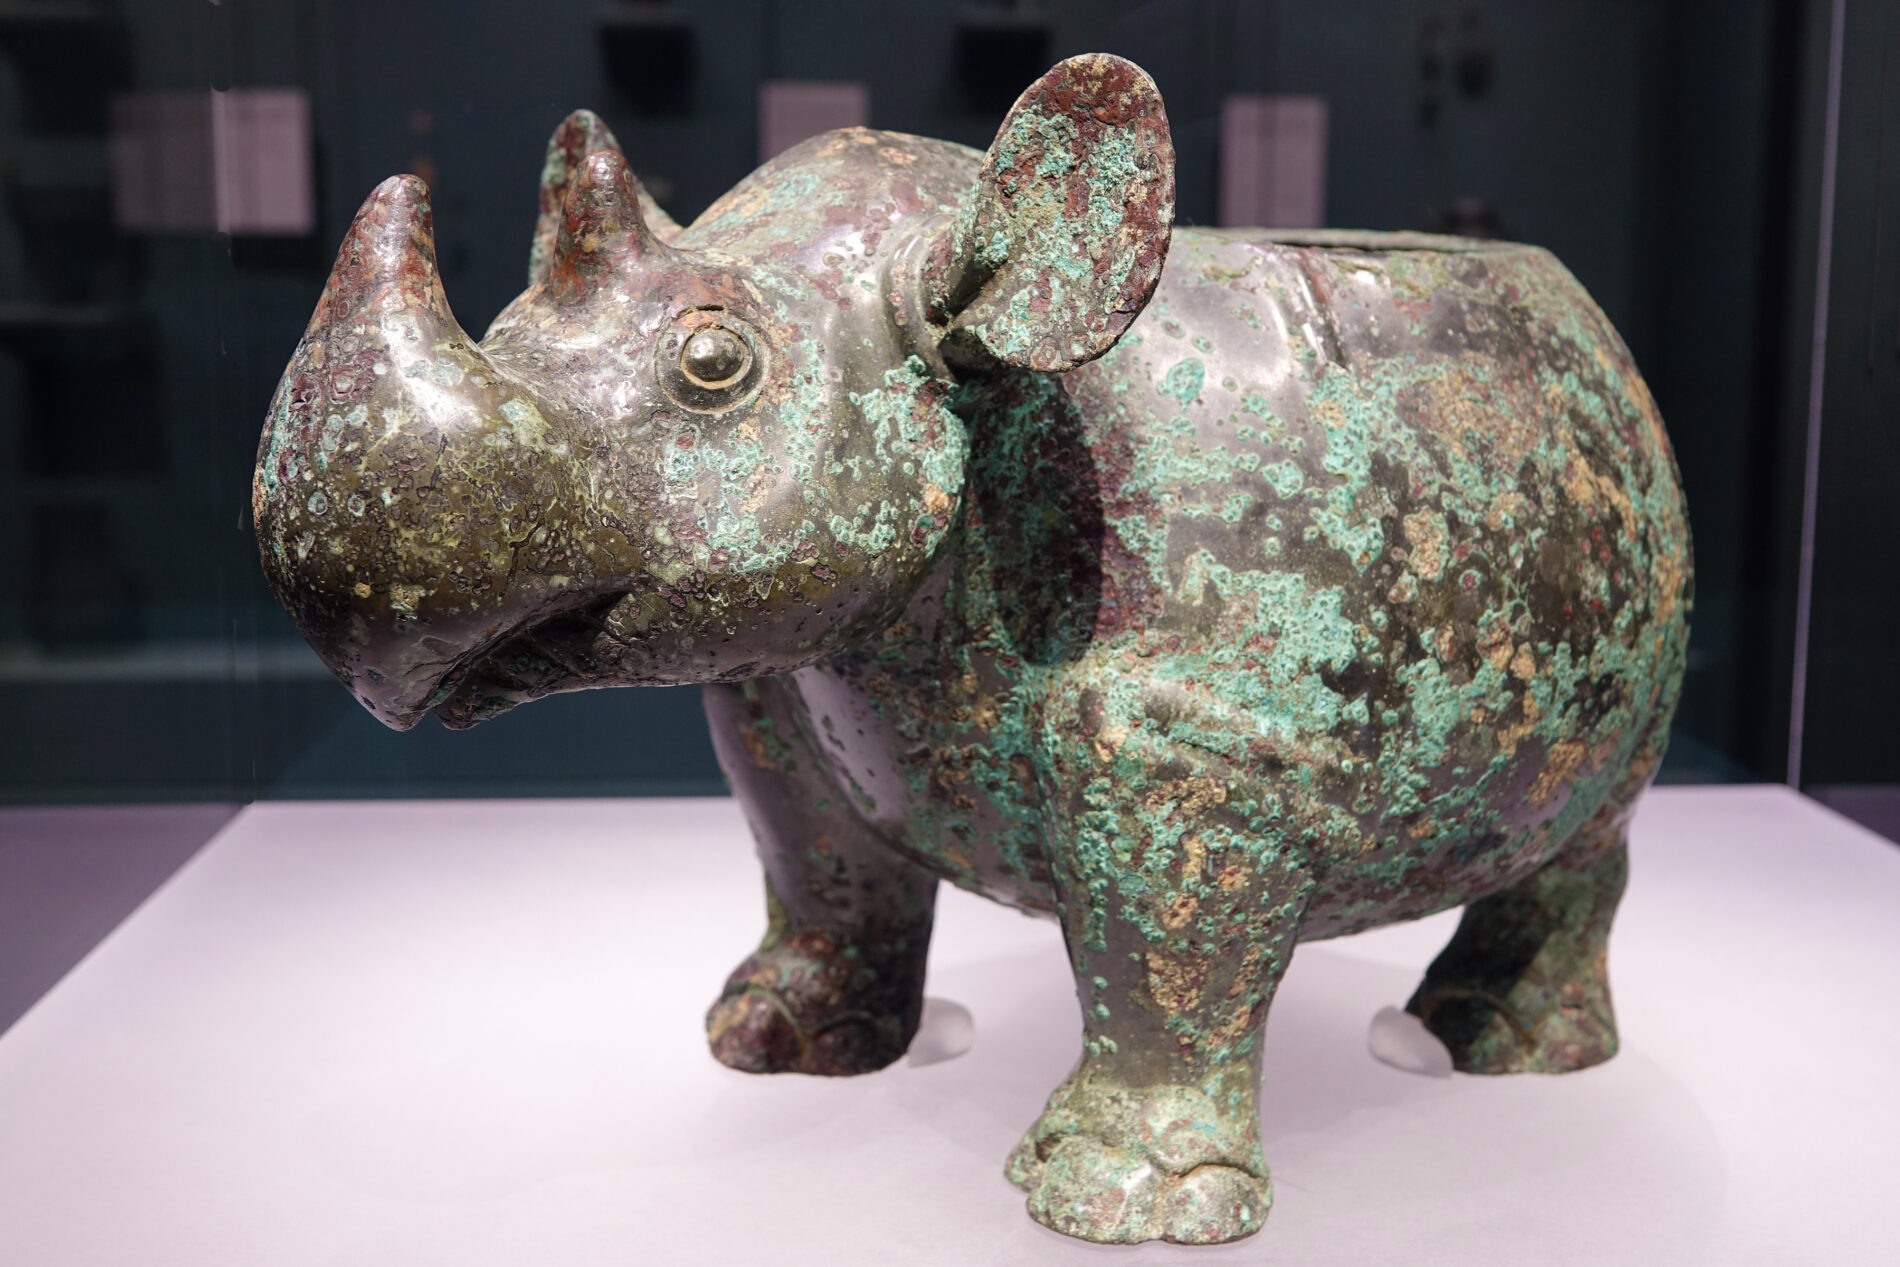 Ritual bronze age vessel in the shape of a Rhino is at least 3000-years-old. It’s at the Asian Art Museum in San Francisco.